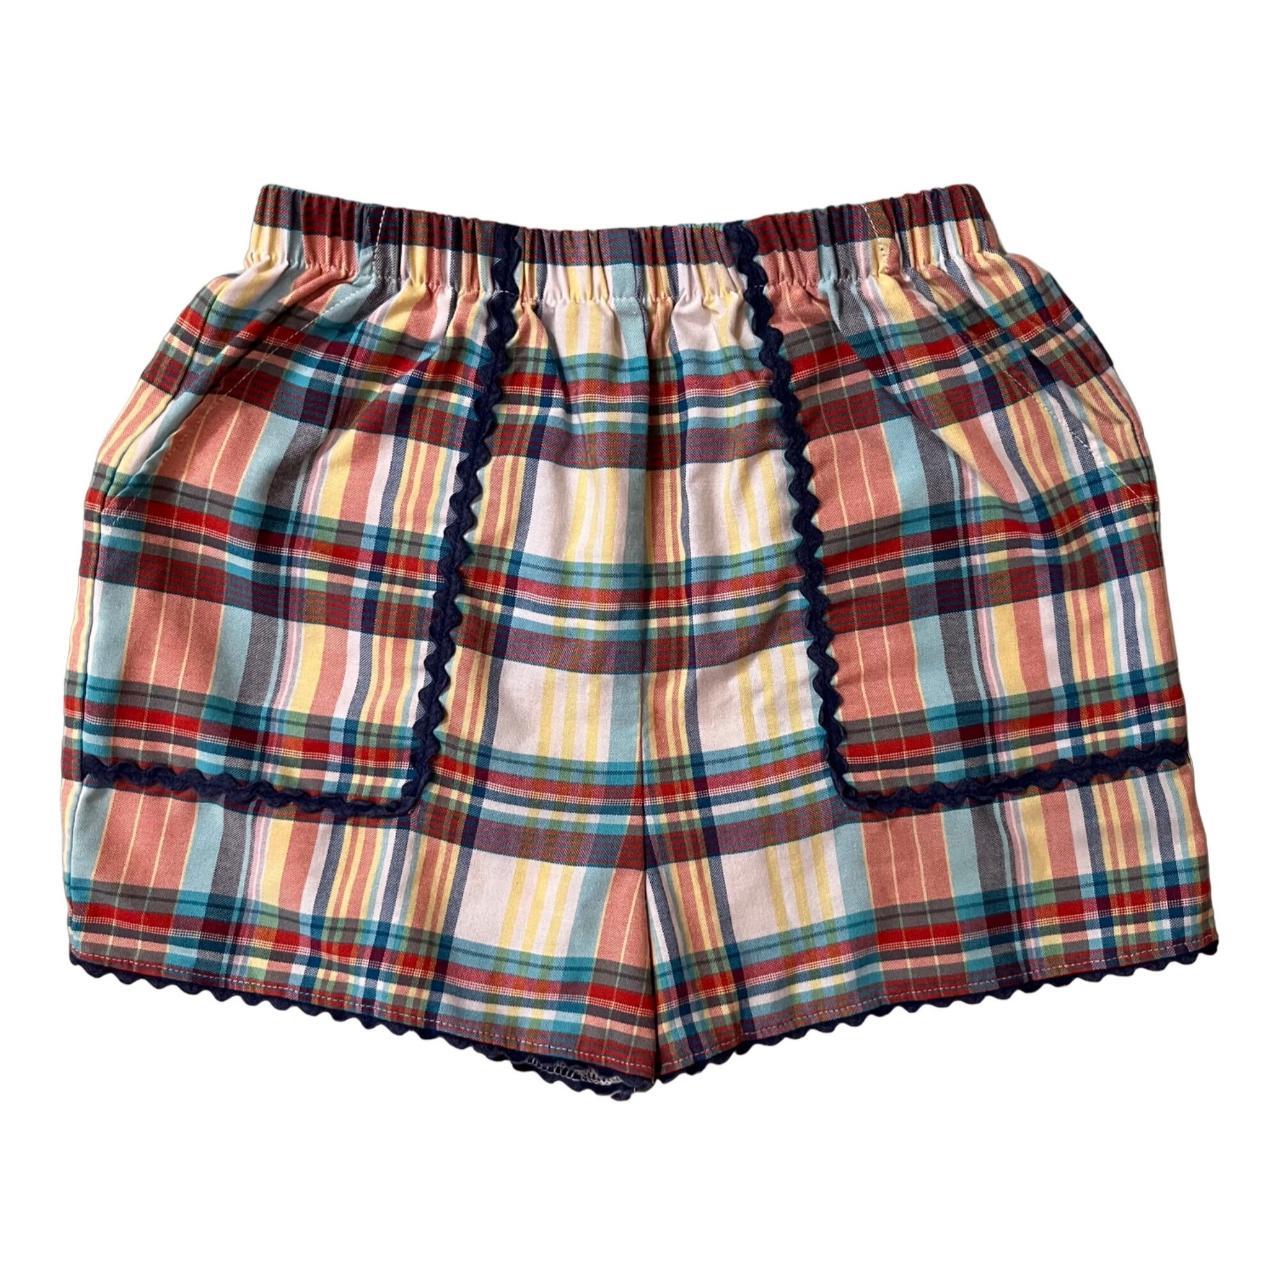 These girl’s sweet plaid shorts are by Kelly Kids... - Depop